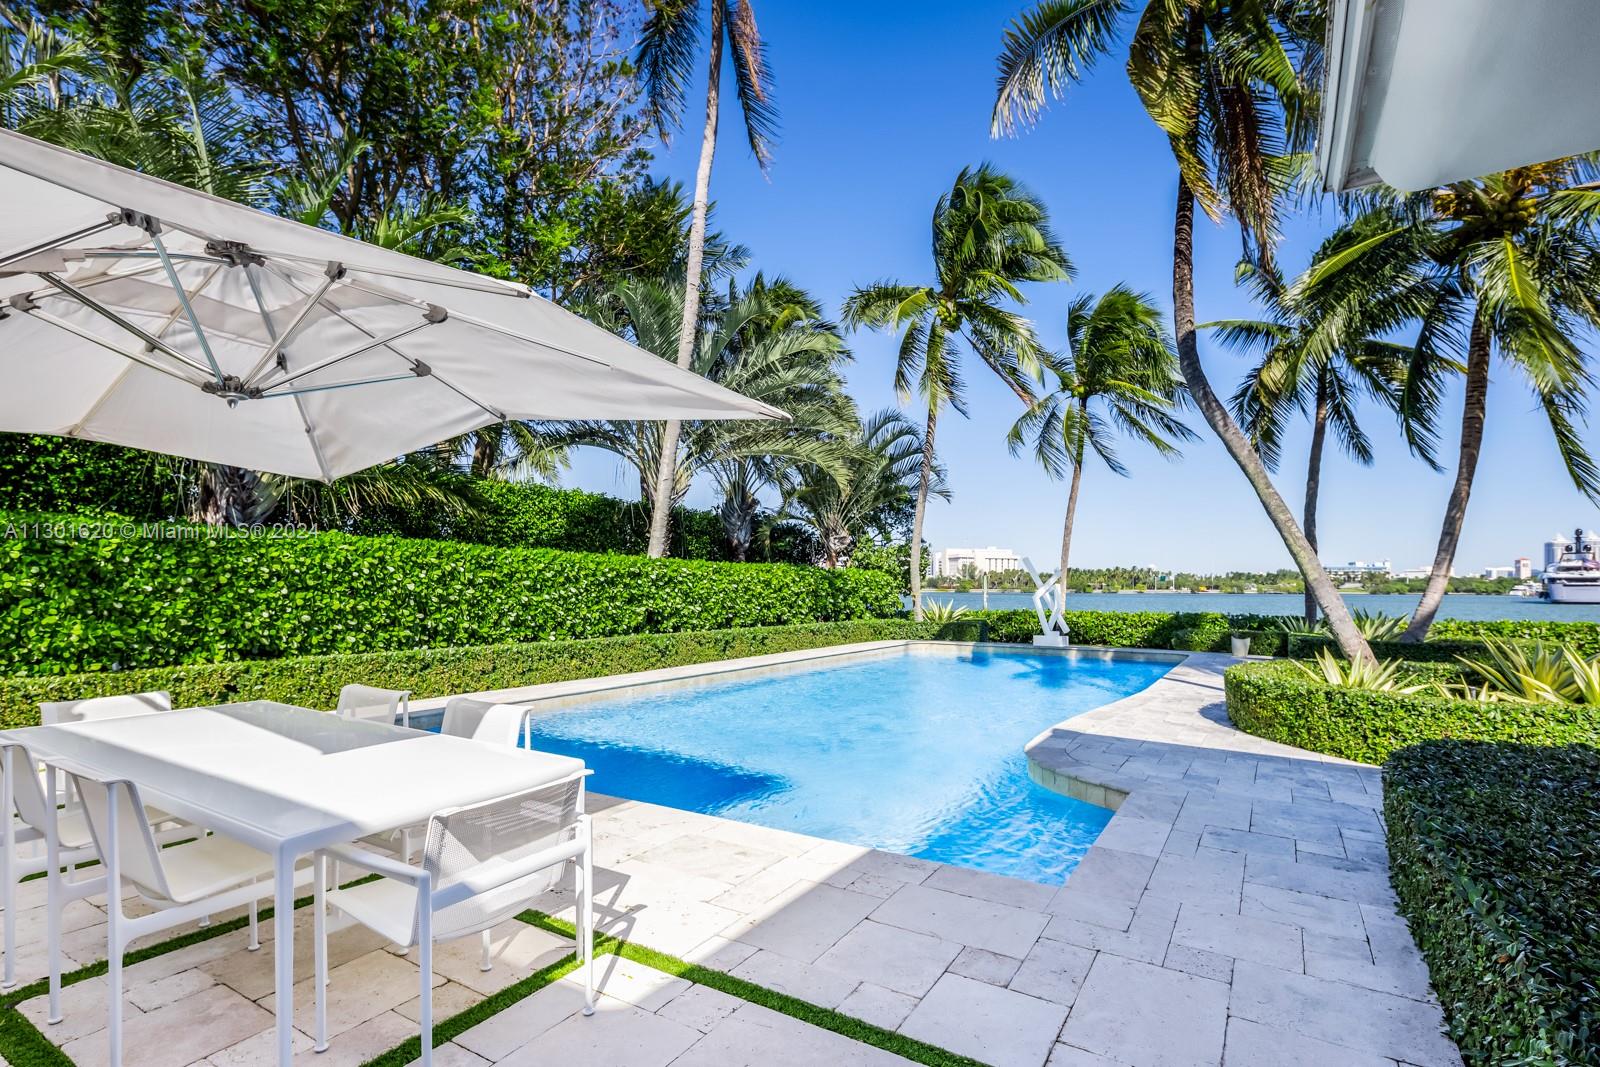 1365 N View Dr, Miami Beach, Florida, 33140, United States, 5 Bedrooms Bedrooms, ,6 BathroomsBathrooms,Residential,For Sale,1365 N View Dr,1506217